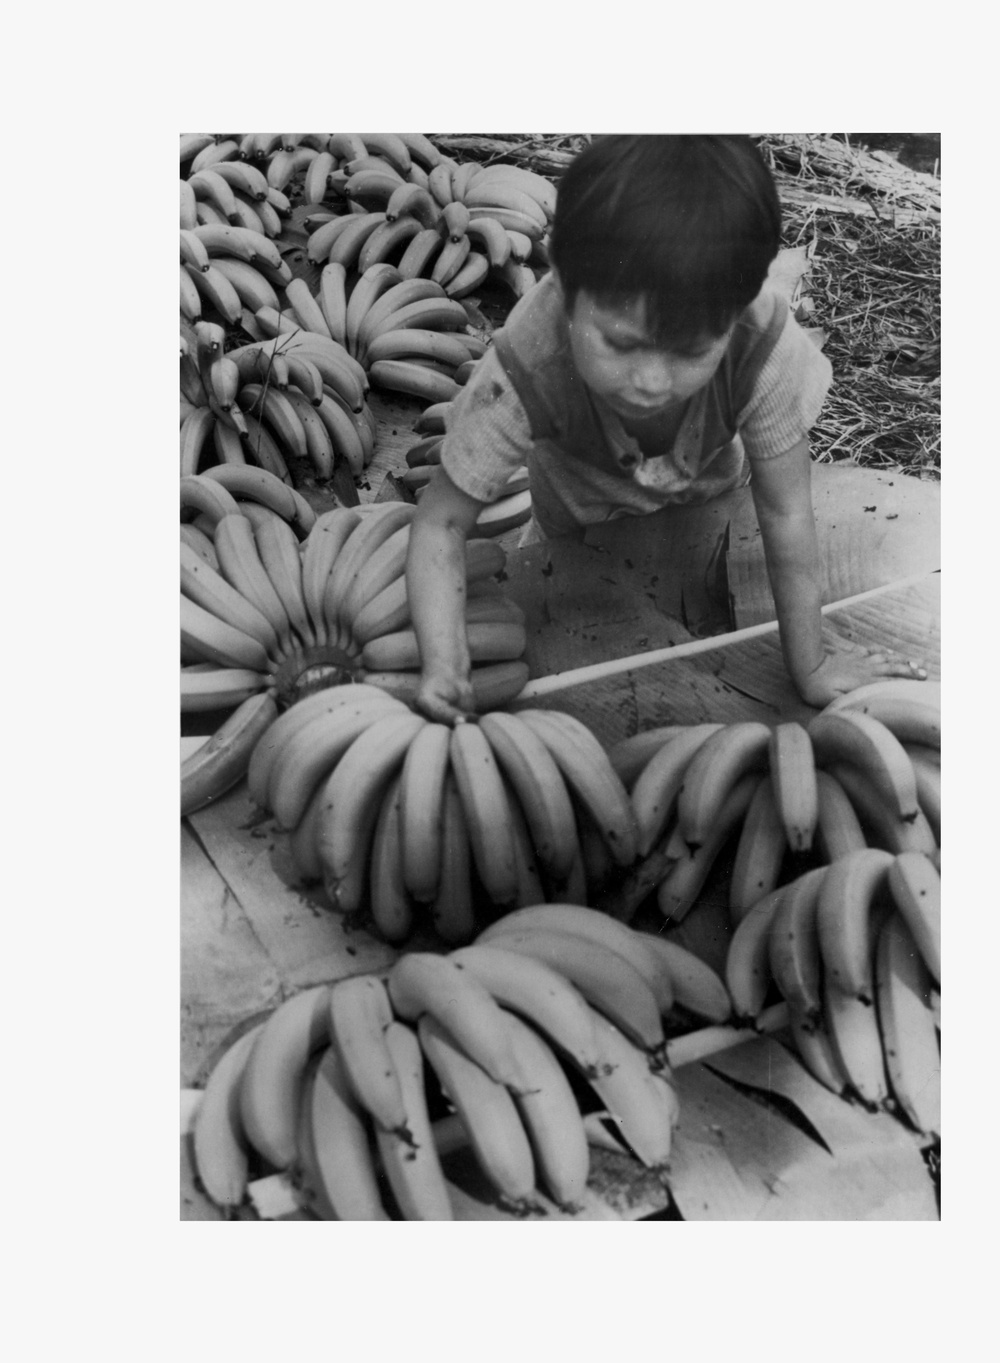 Child with bananas